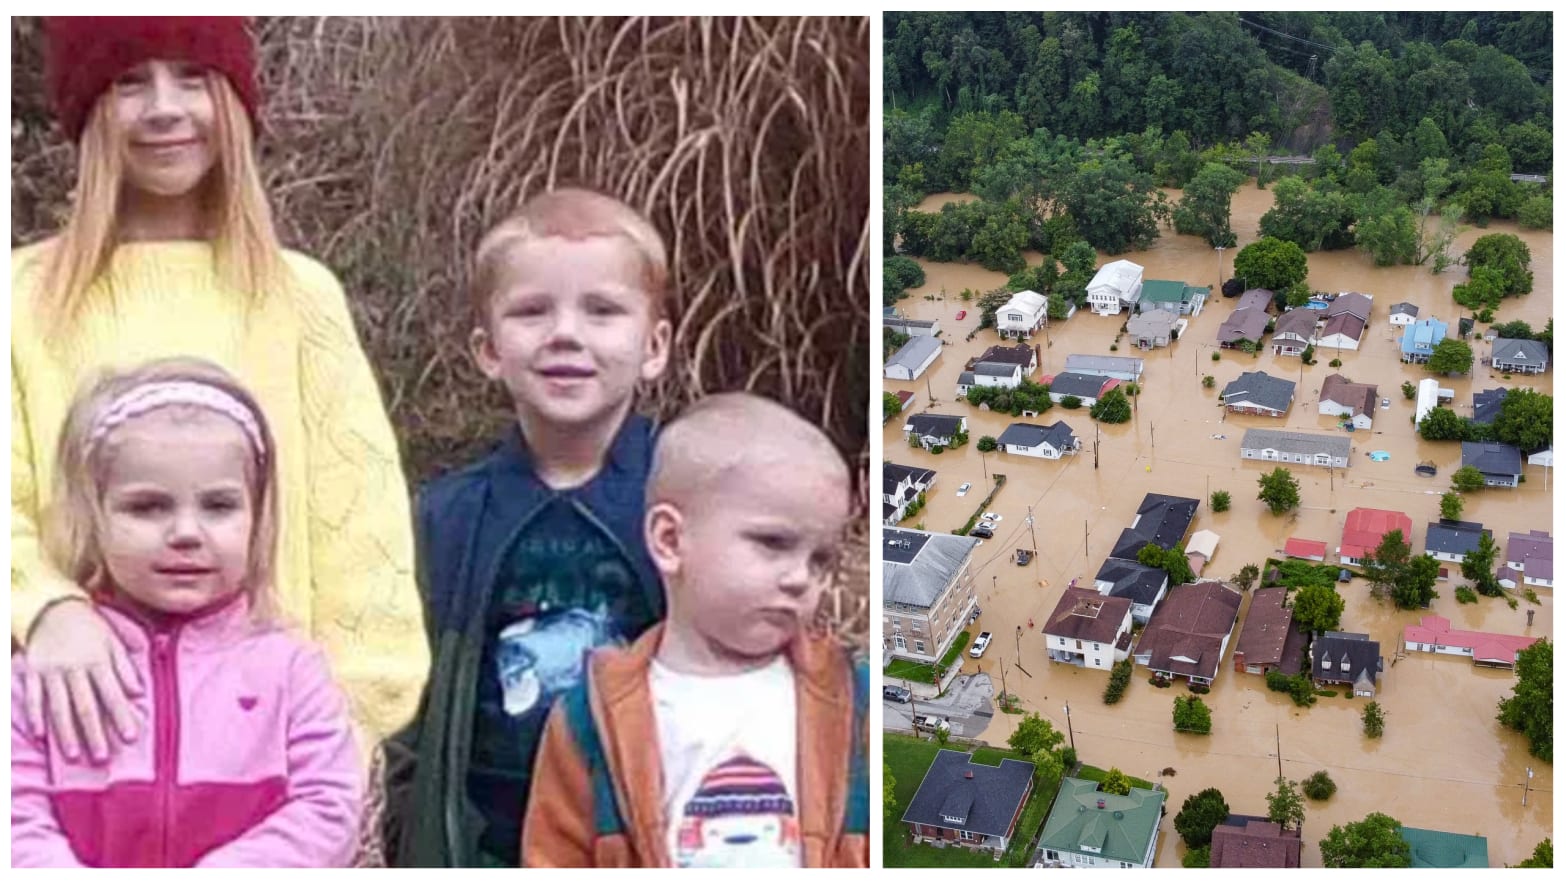 Four Young Siblings Drown After Floodwaters Swept Them from Their Parents’ Arms in Kentucky